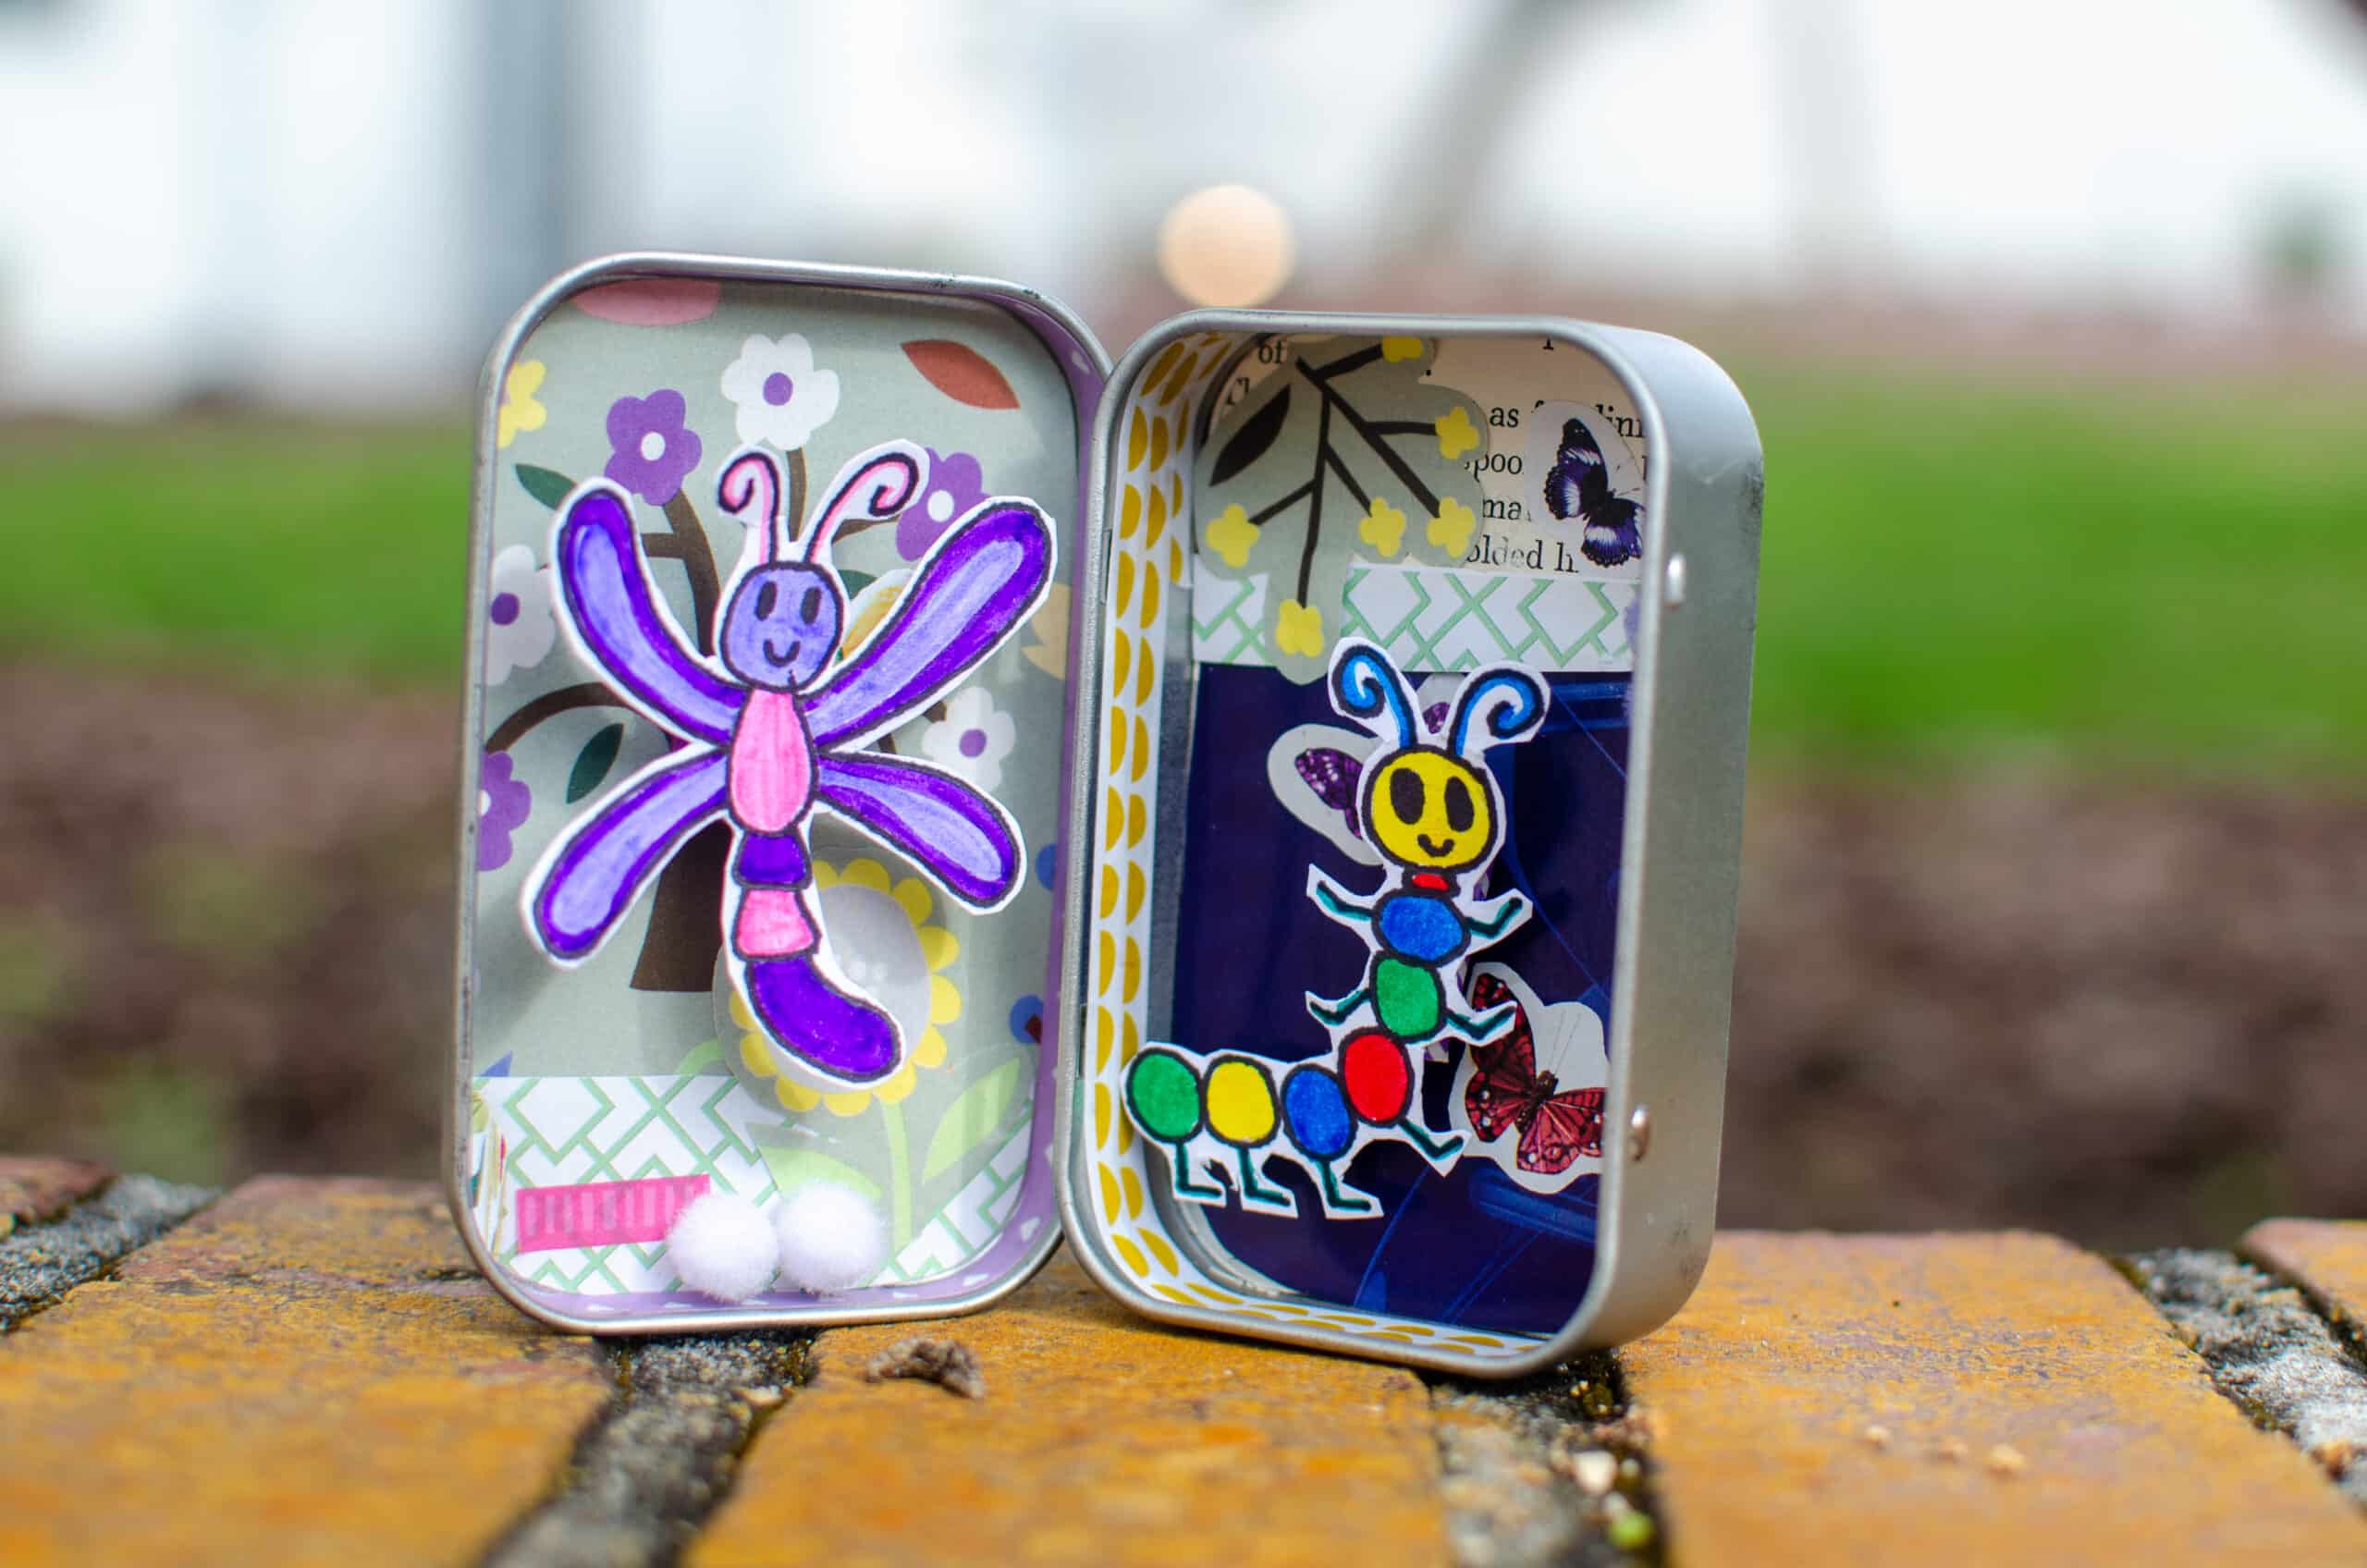 Tin box opened and decorated with paper, fabrics, and colorful drawings that represent bugs.